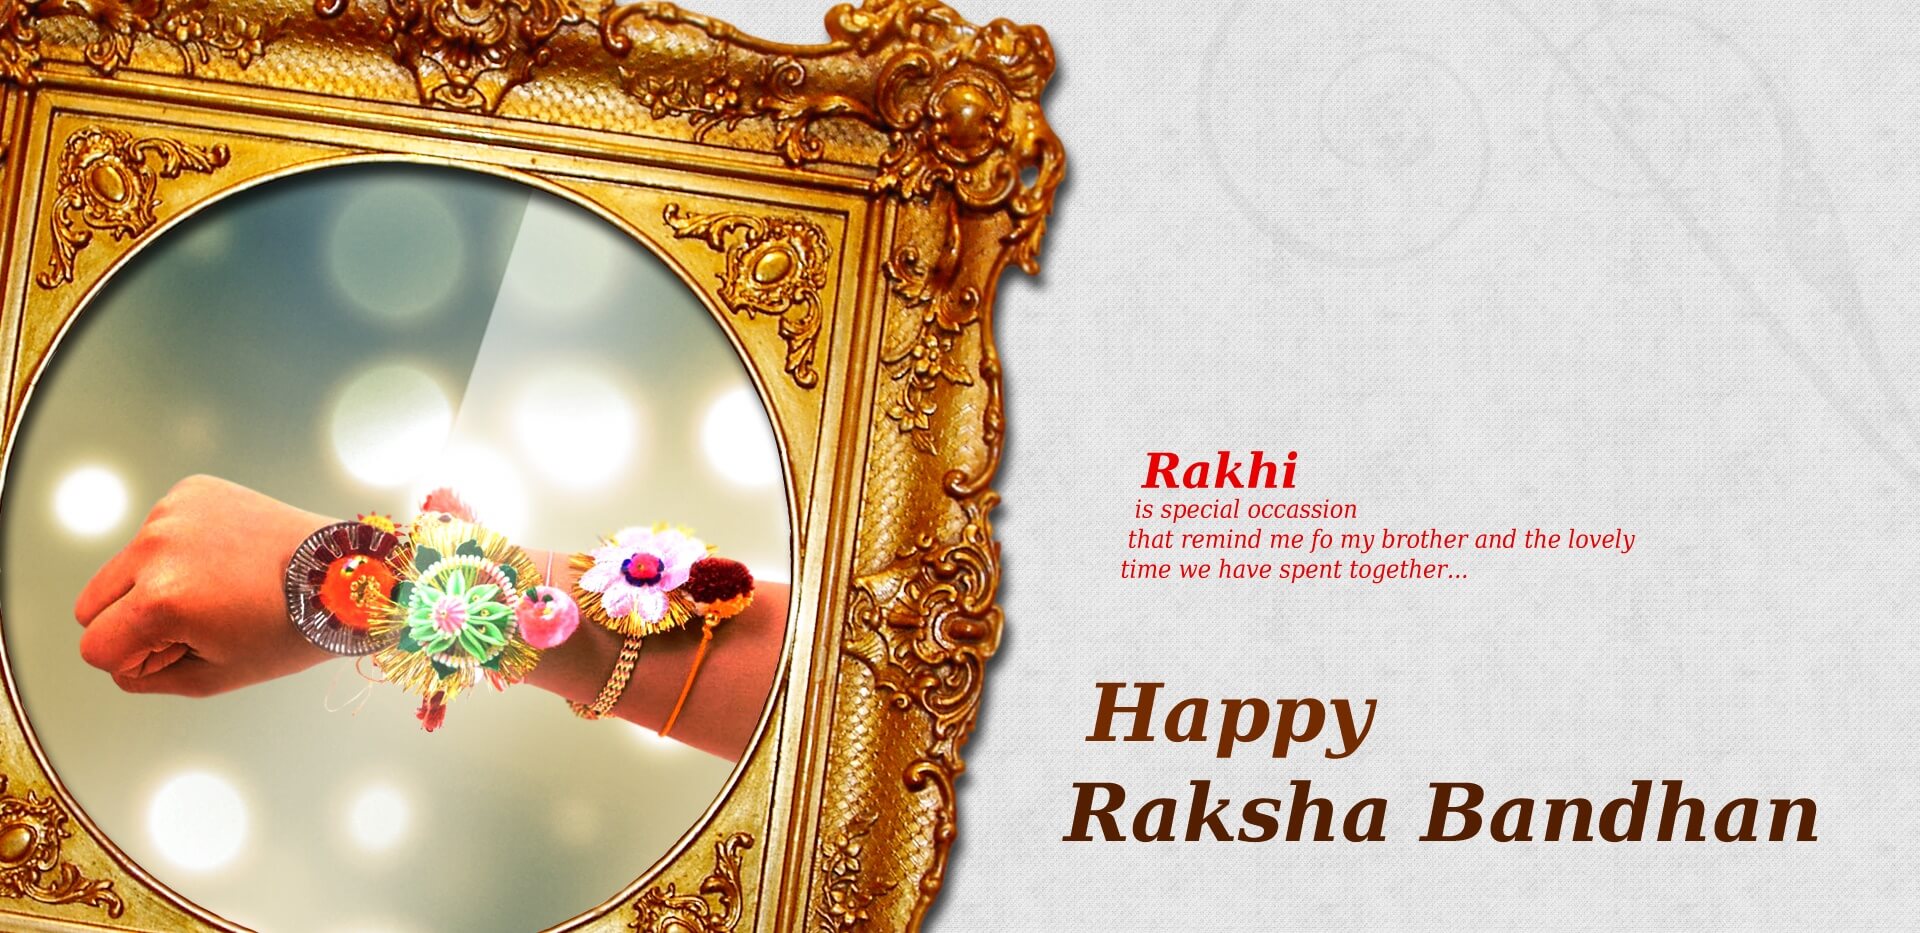 Happy Raksha Bandhan Messages quotes wishes wallpapers images